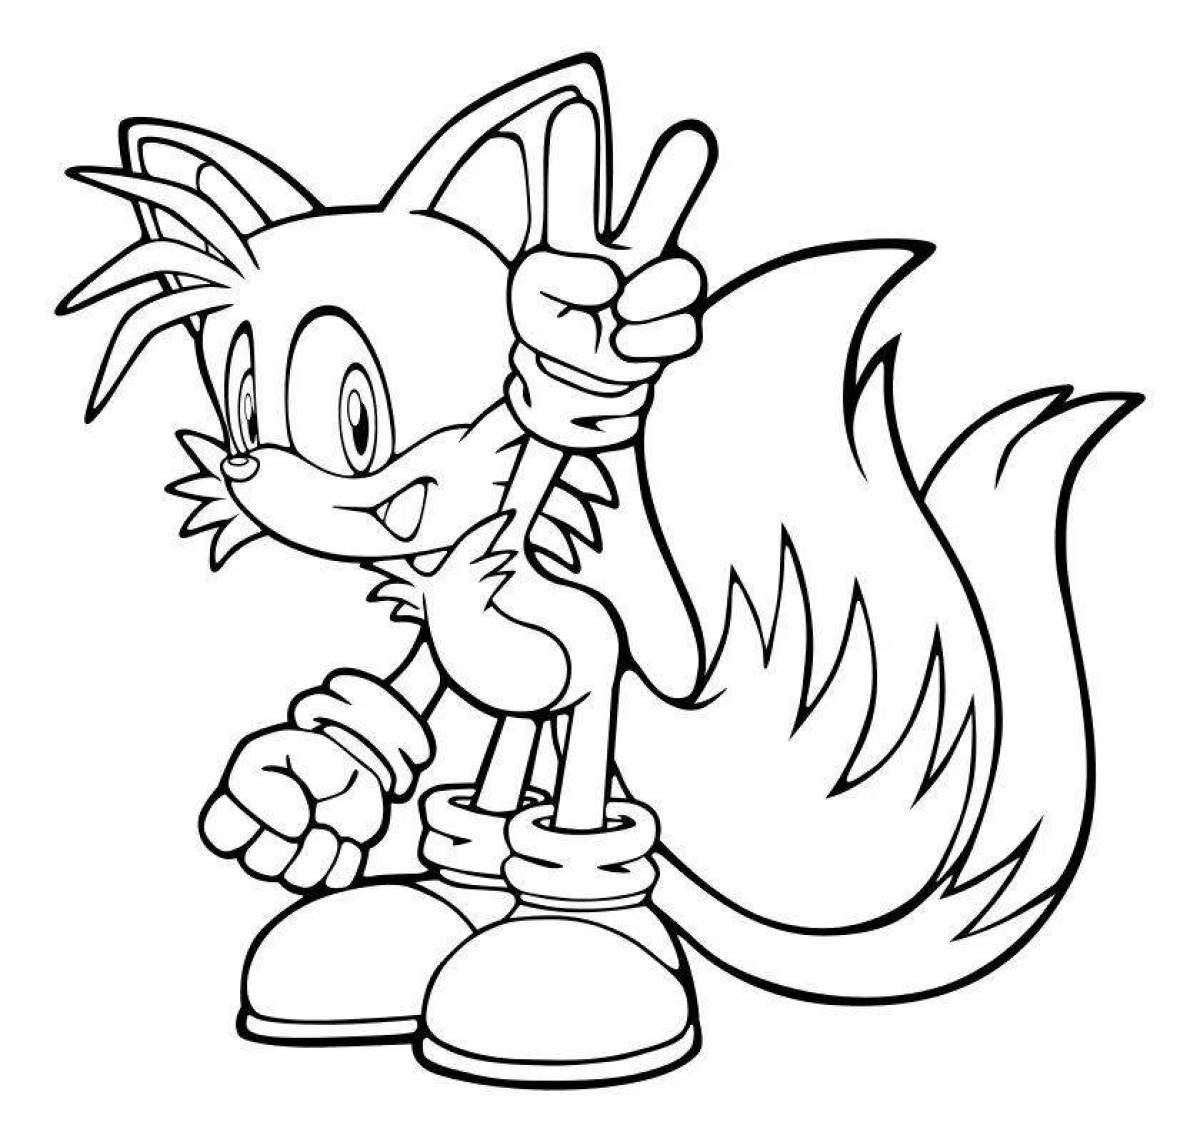 Colorful tails exe coloring